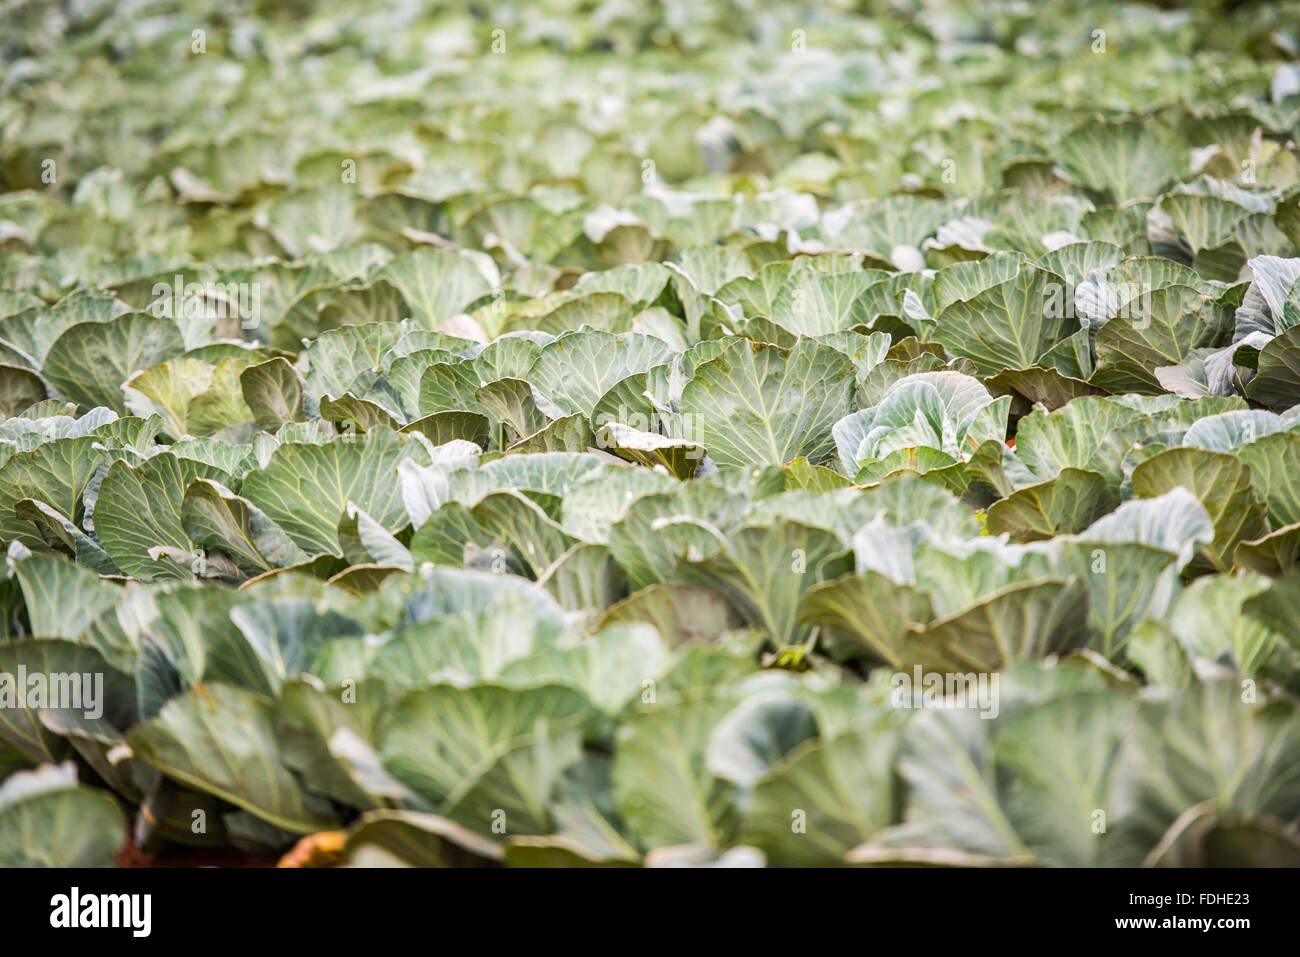 Cabbage patch in the Hhohho region of Swaziland, Africa. Stock Photo